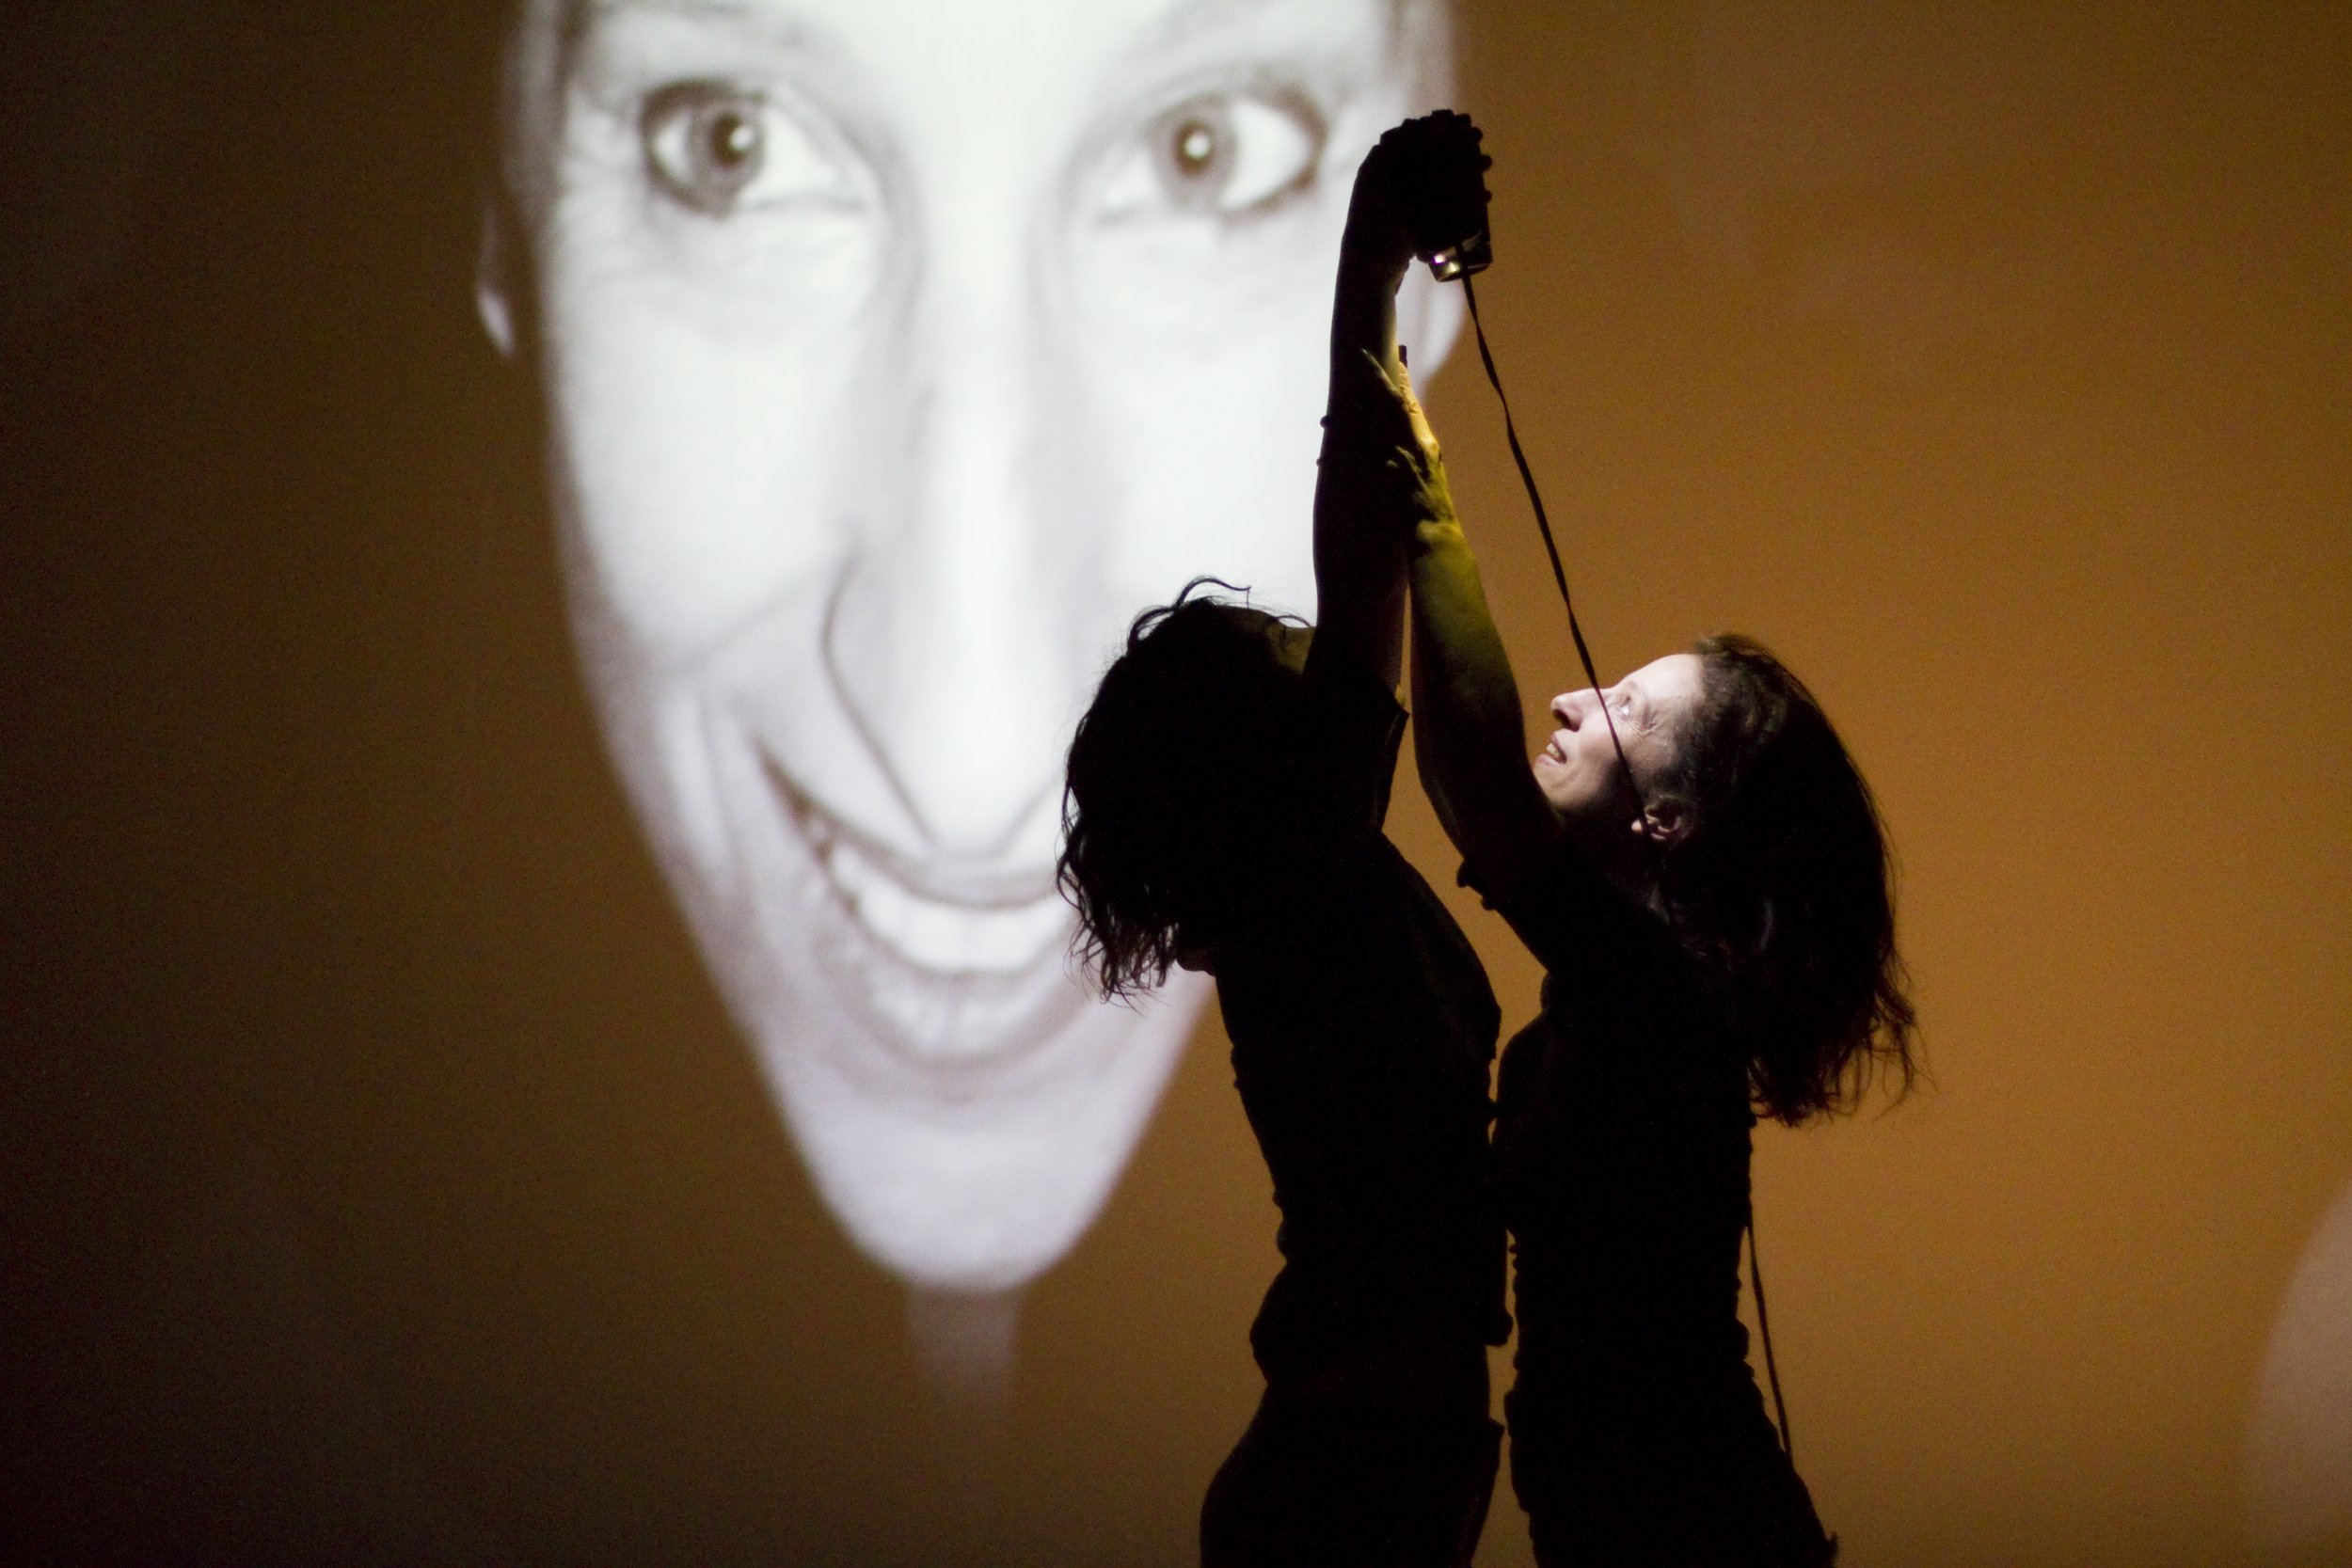 Two dancers reach upwards, one holds a video camera.